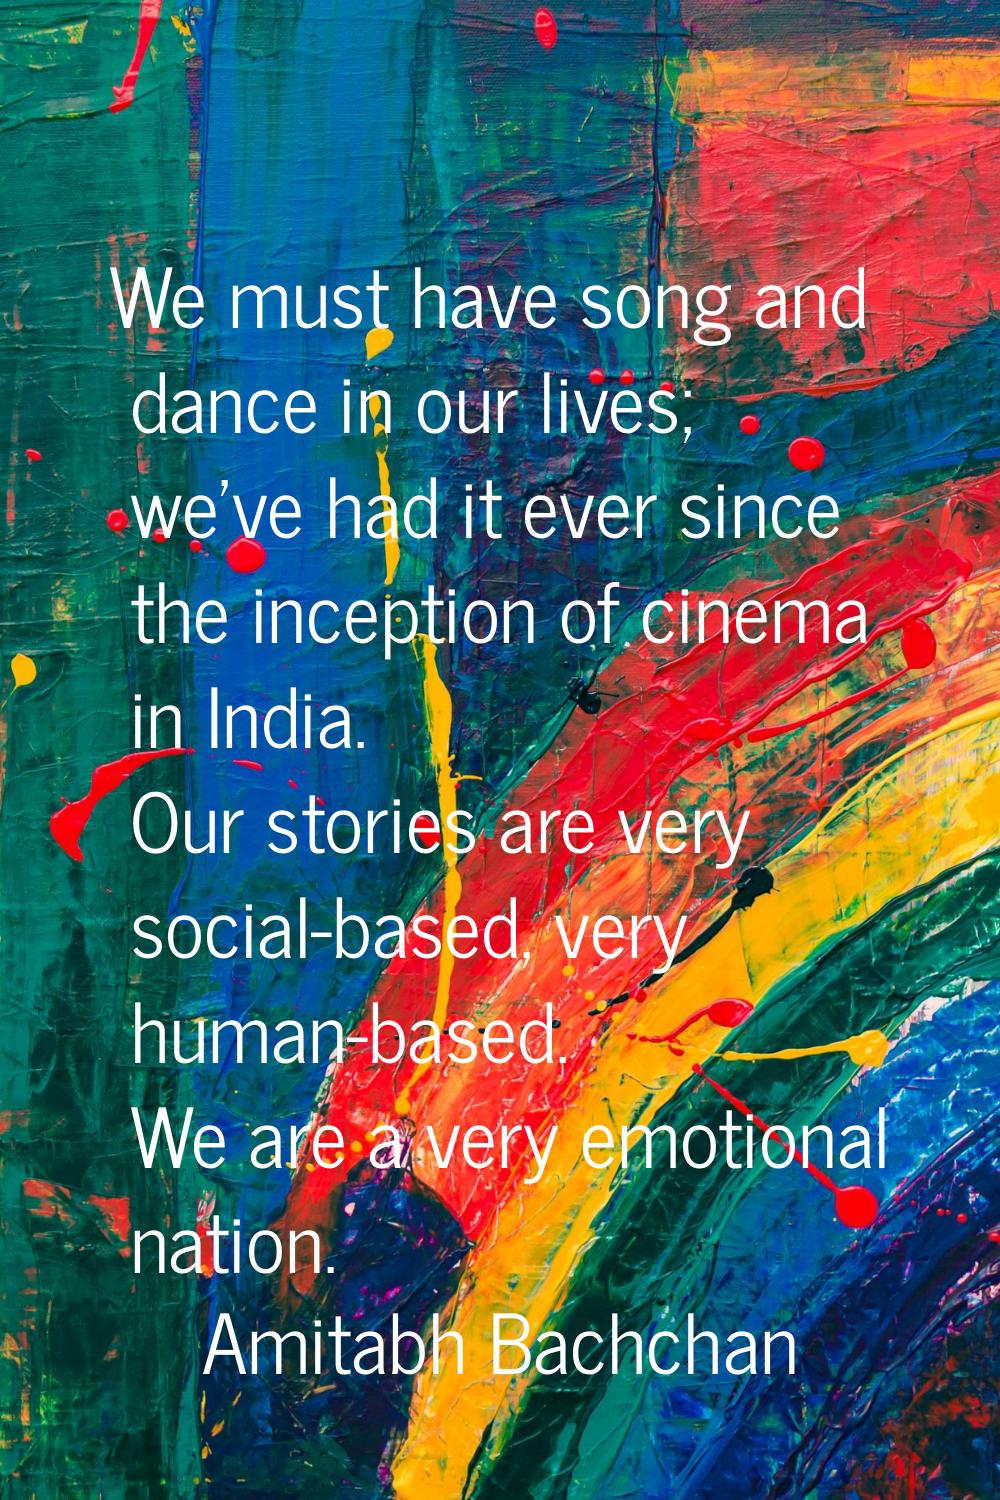 We must have song and dance in our lives; we've had it ever since the inception of cinema in India.